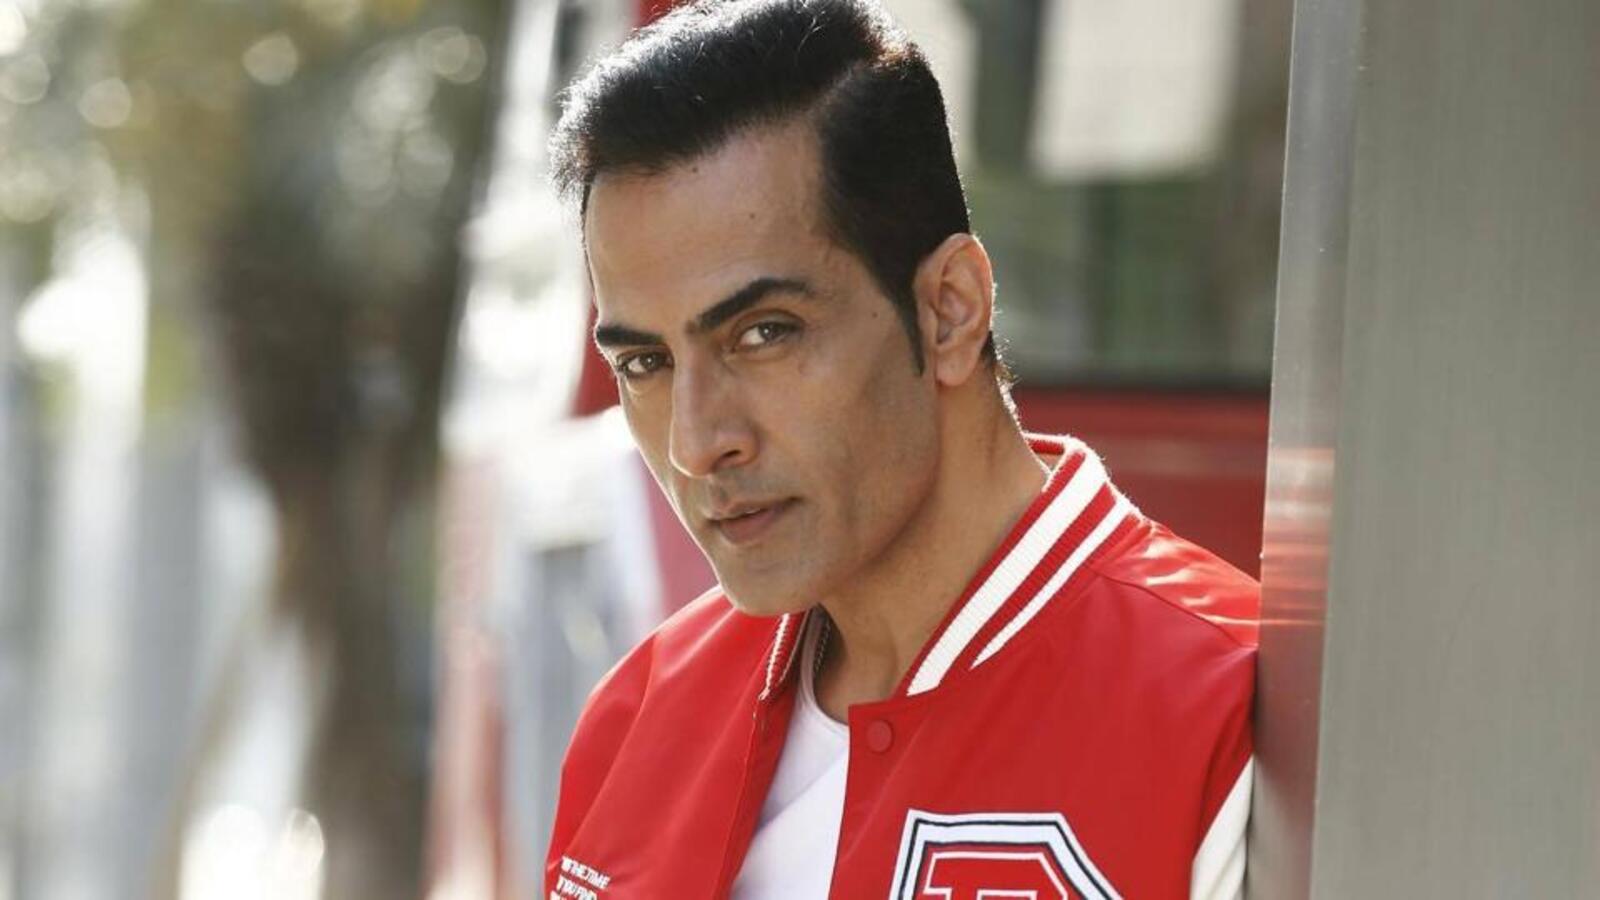 Sudhanshu Pandey: OTT is huge, but difficult to say if OTT actors are becoming stars